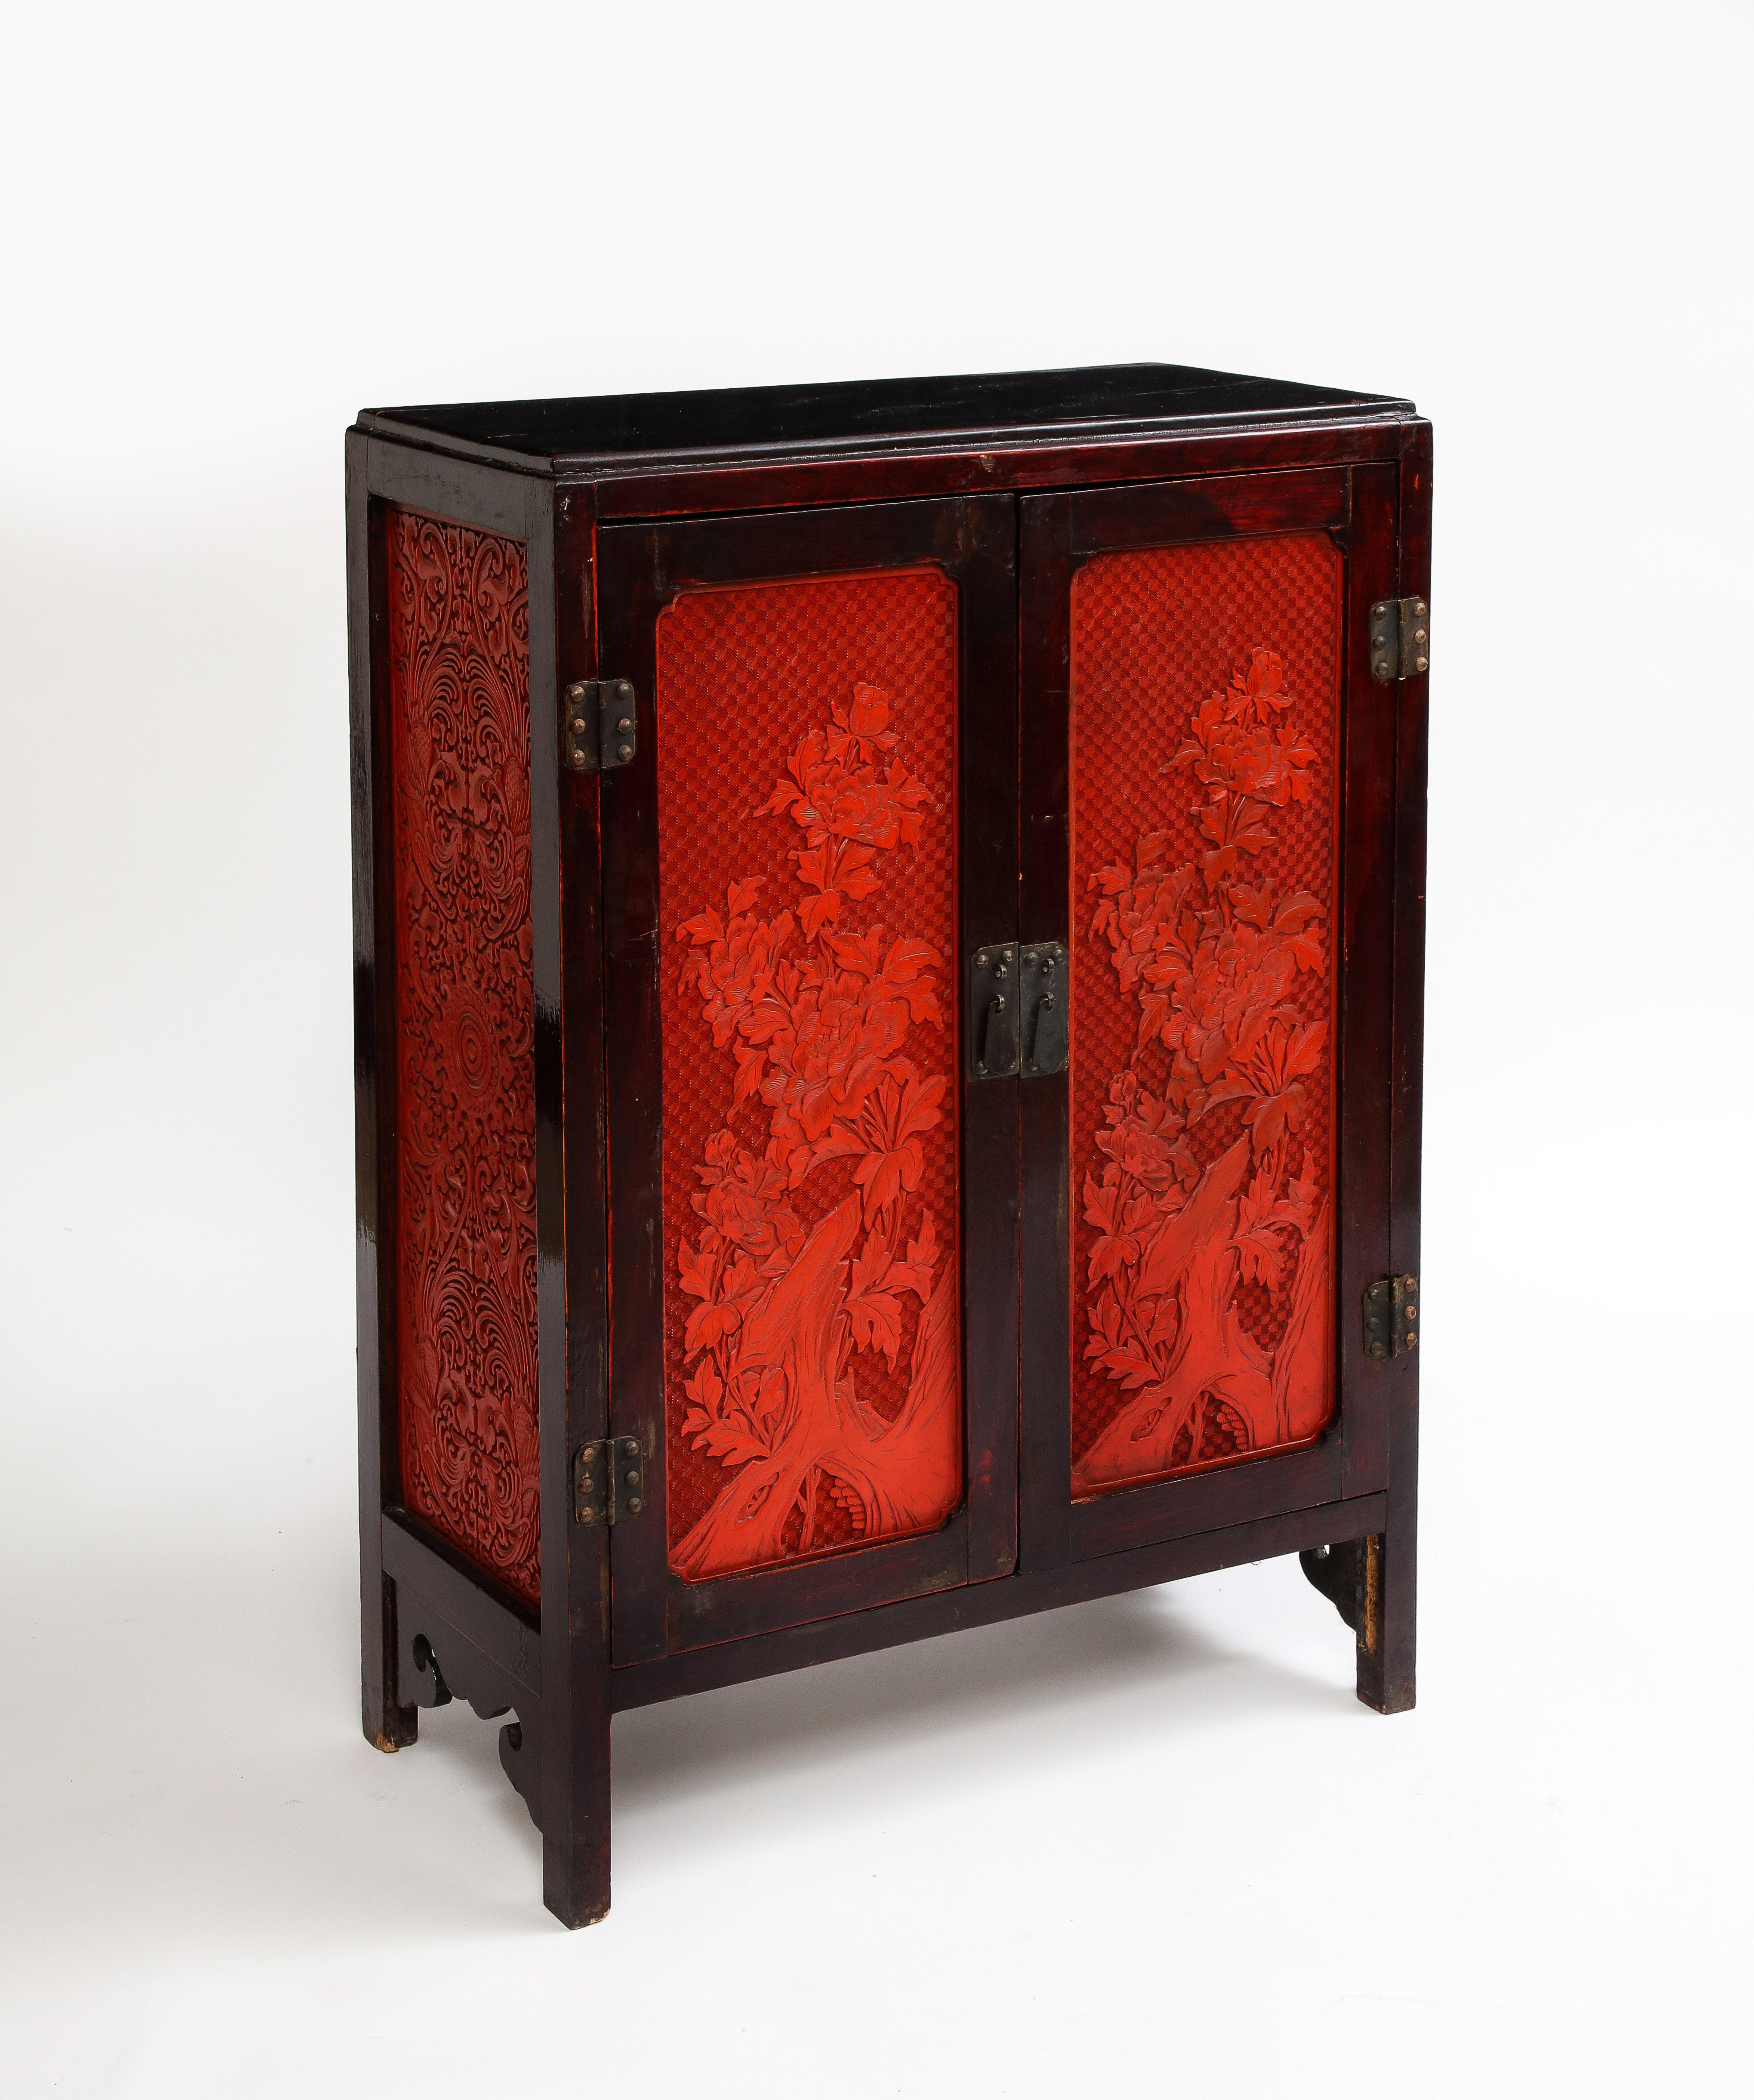 Chinese Export A 19th Century Chinese Cinnabar Panel Inlaid Hardwood Cabinet For Sale